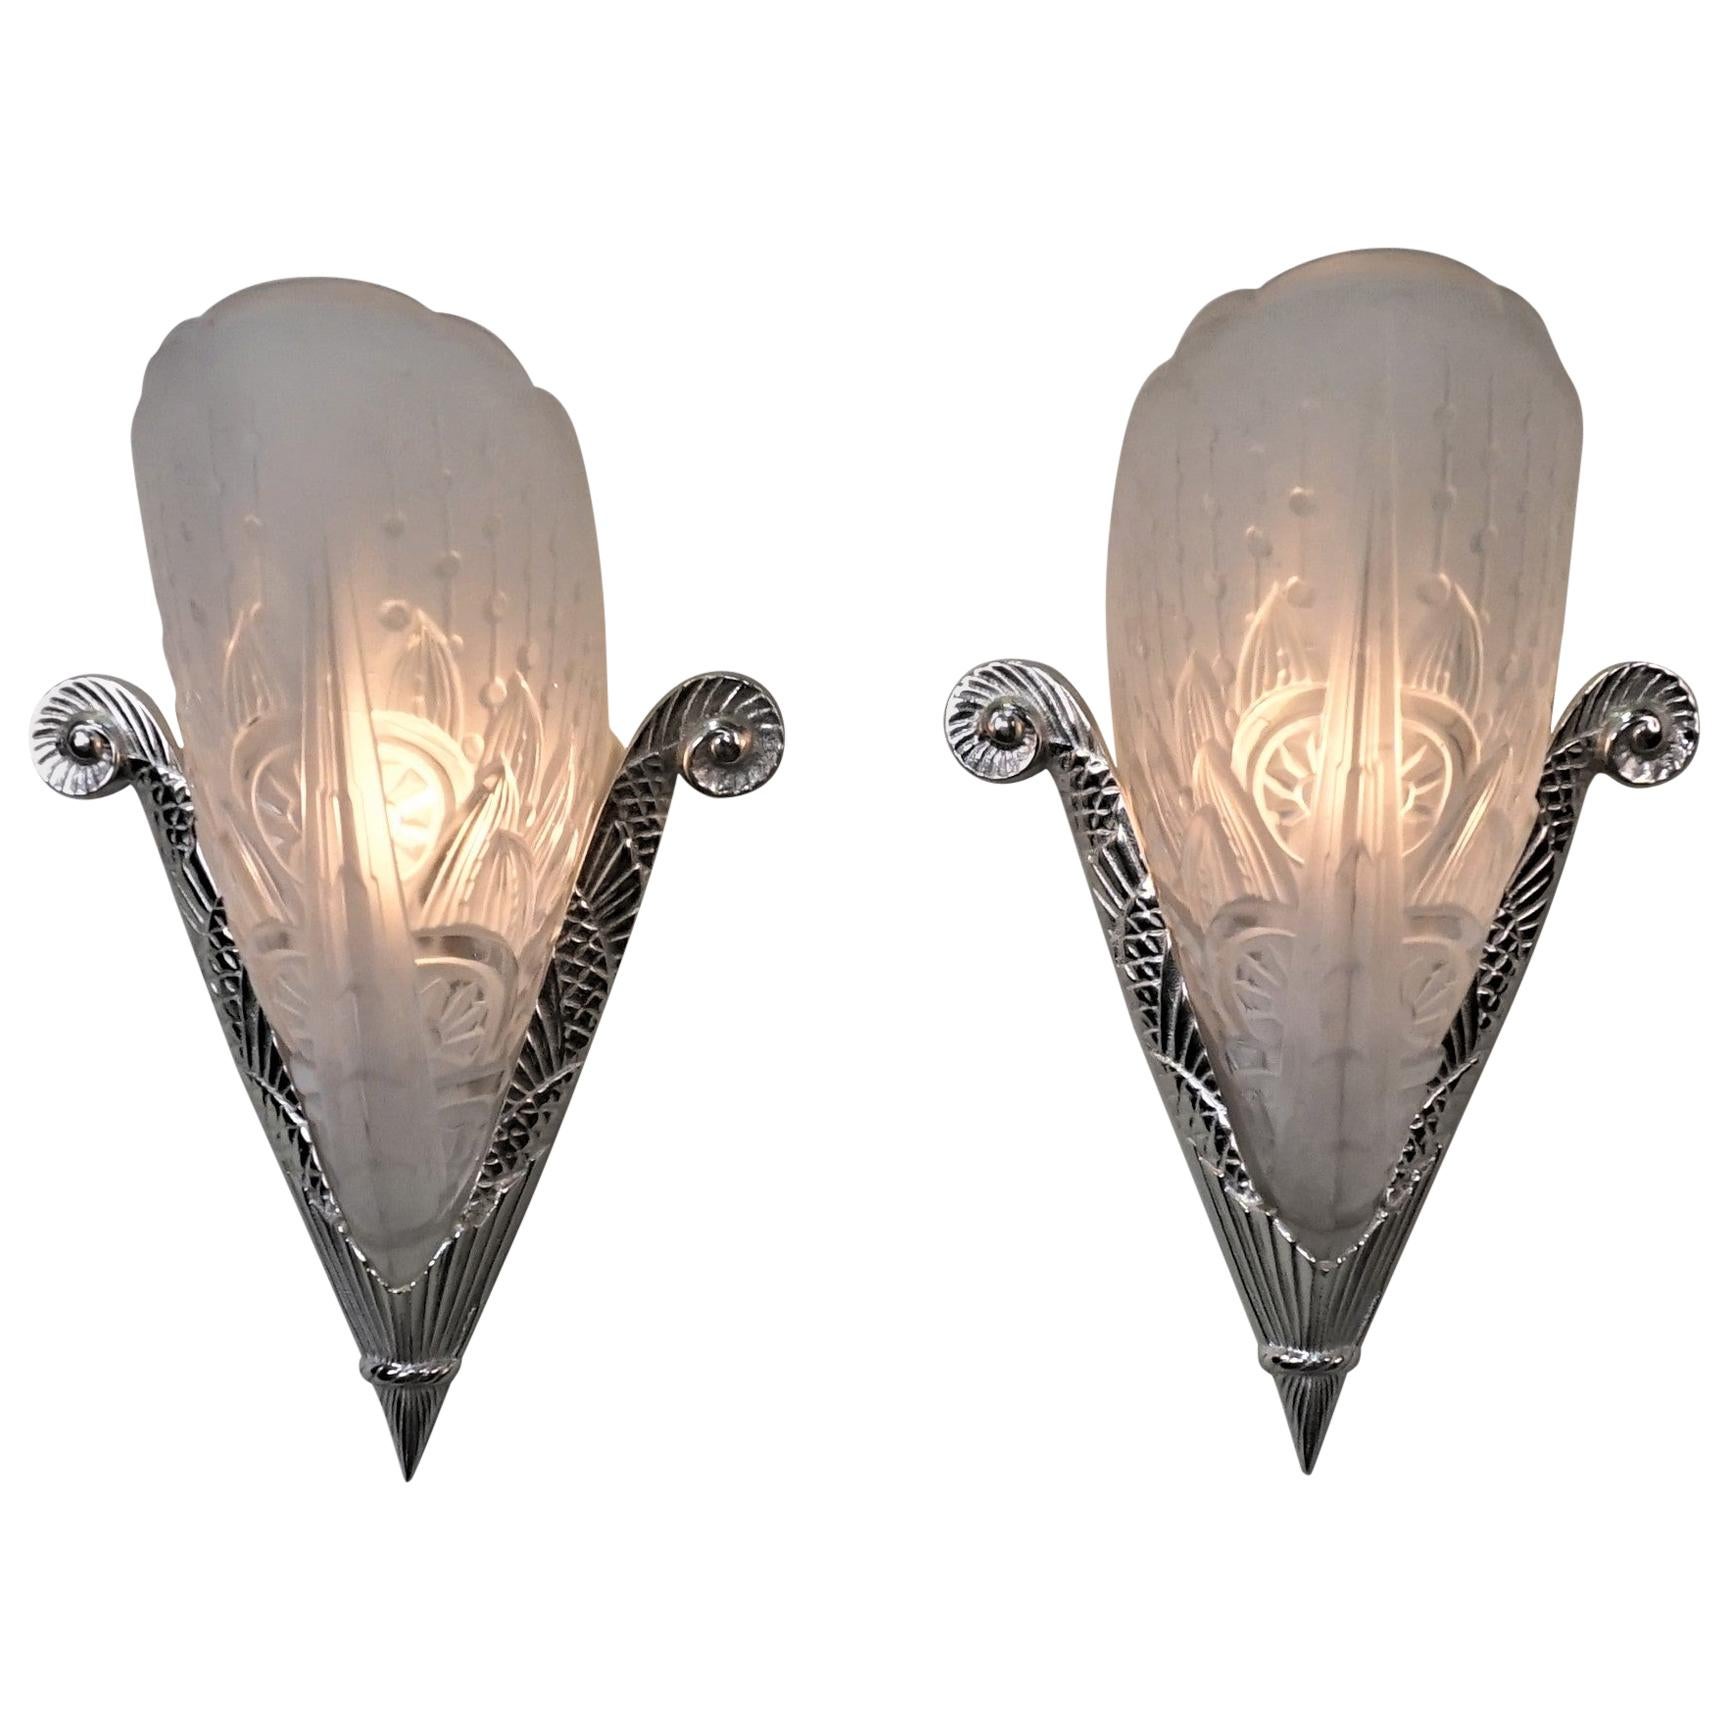 Pair of French Art Deco Wall Sconces by Lorraine Nancy